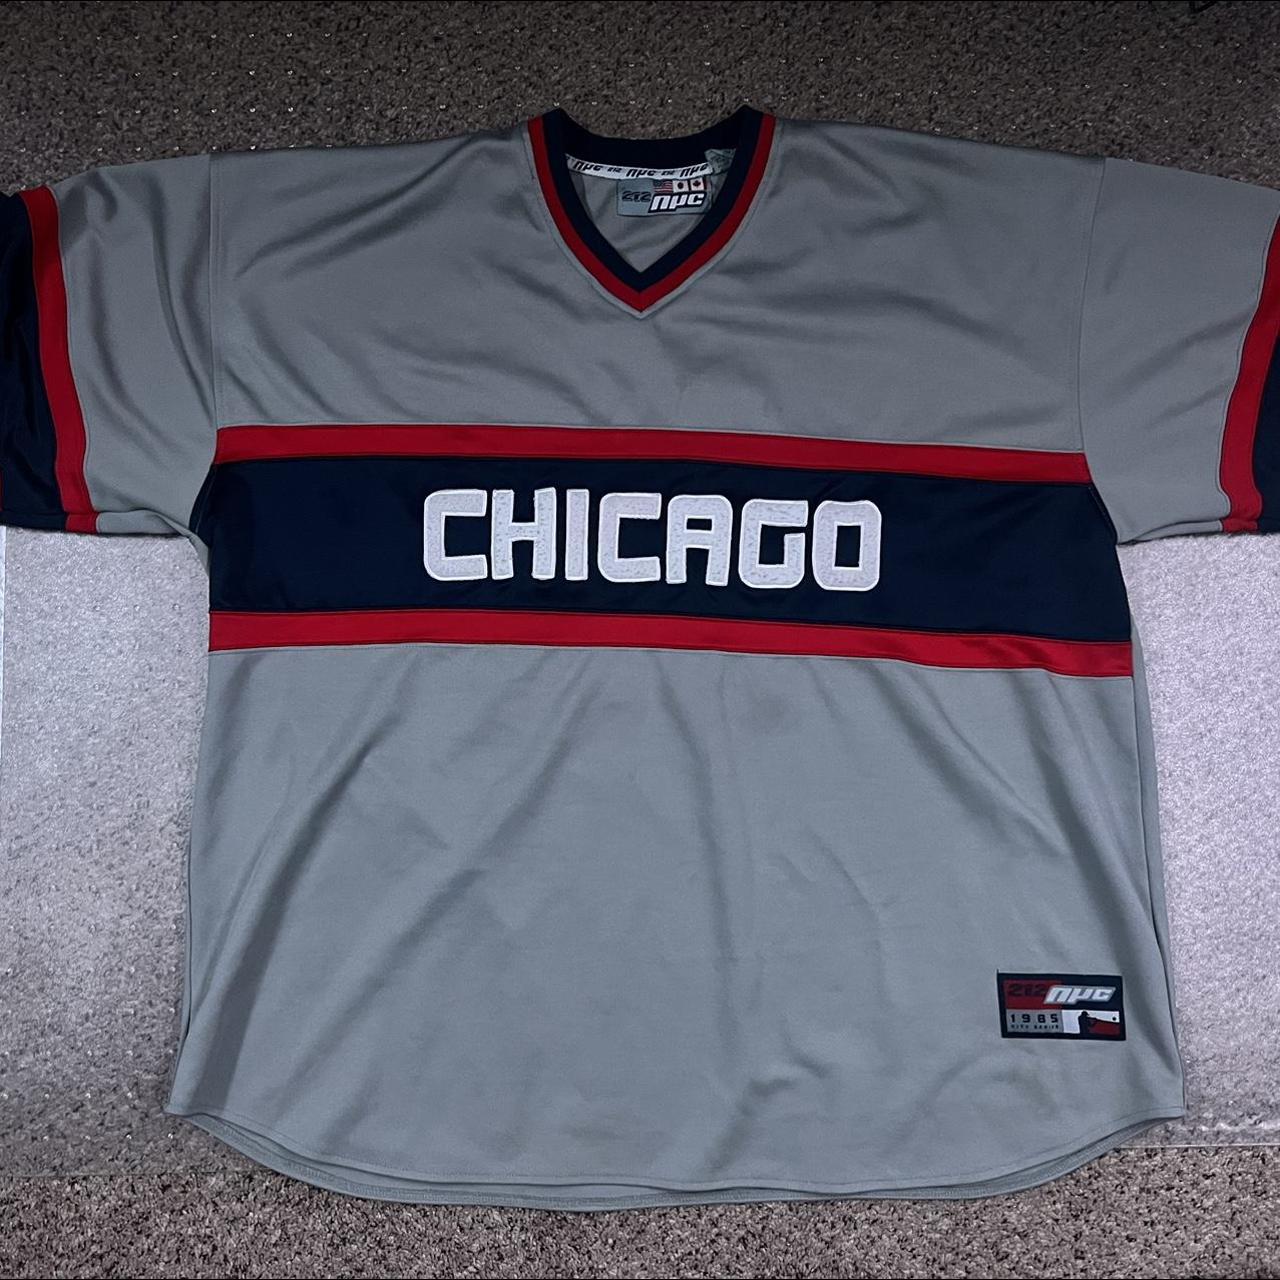 Chicago White Sox “los white sox” soccer jersey size - Depop